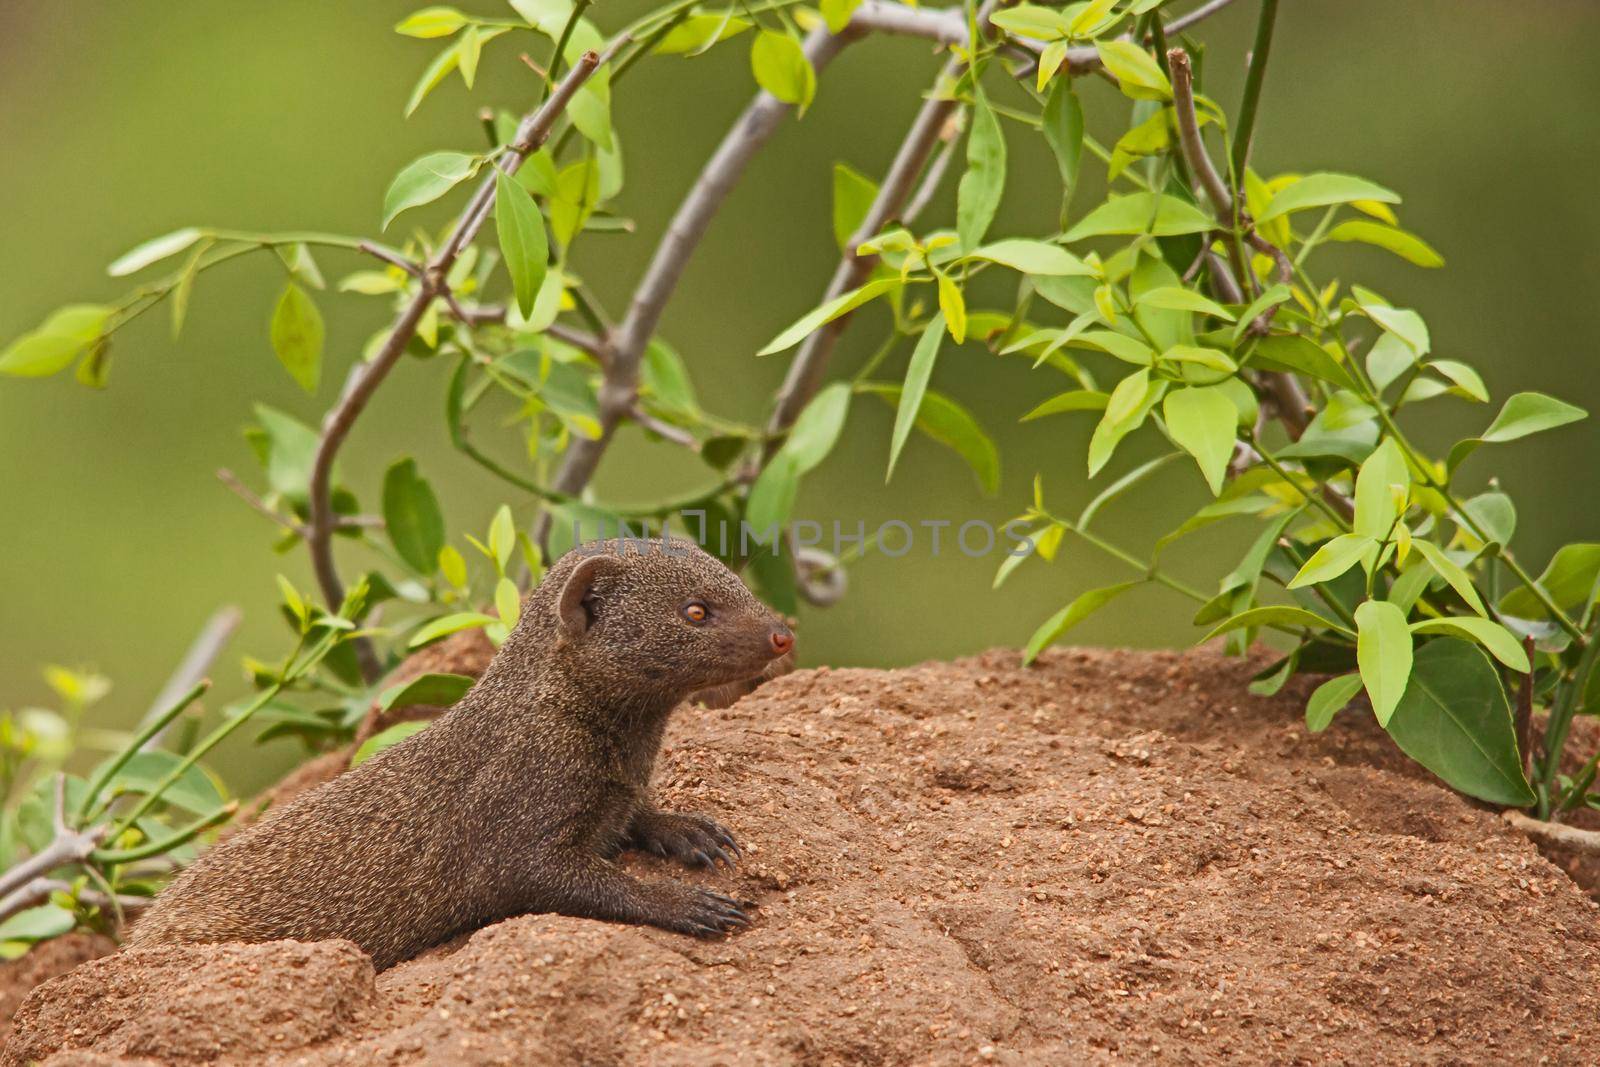 The Dwarf Mongoose (Helogale parvula) is not only the smallest member of the mongoose family, it is the smalles carnivore in all of Africa,